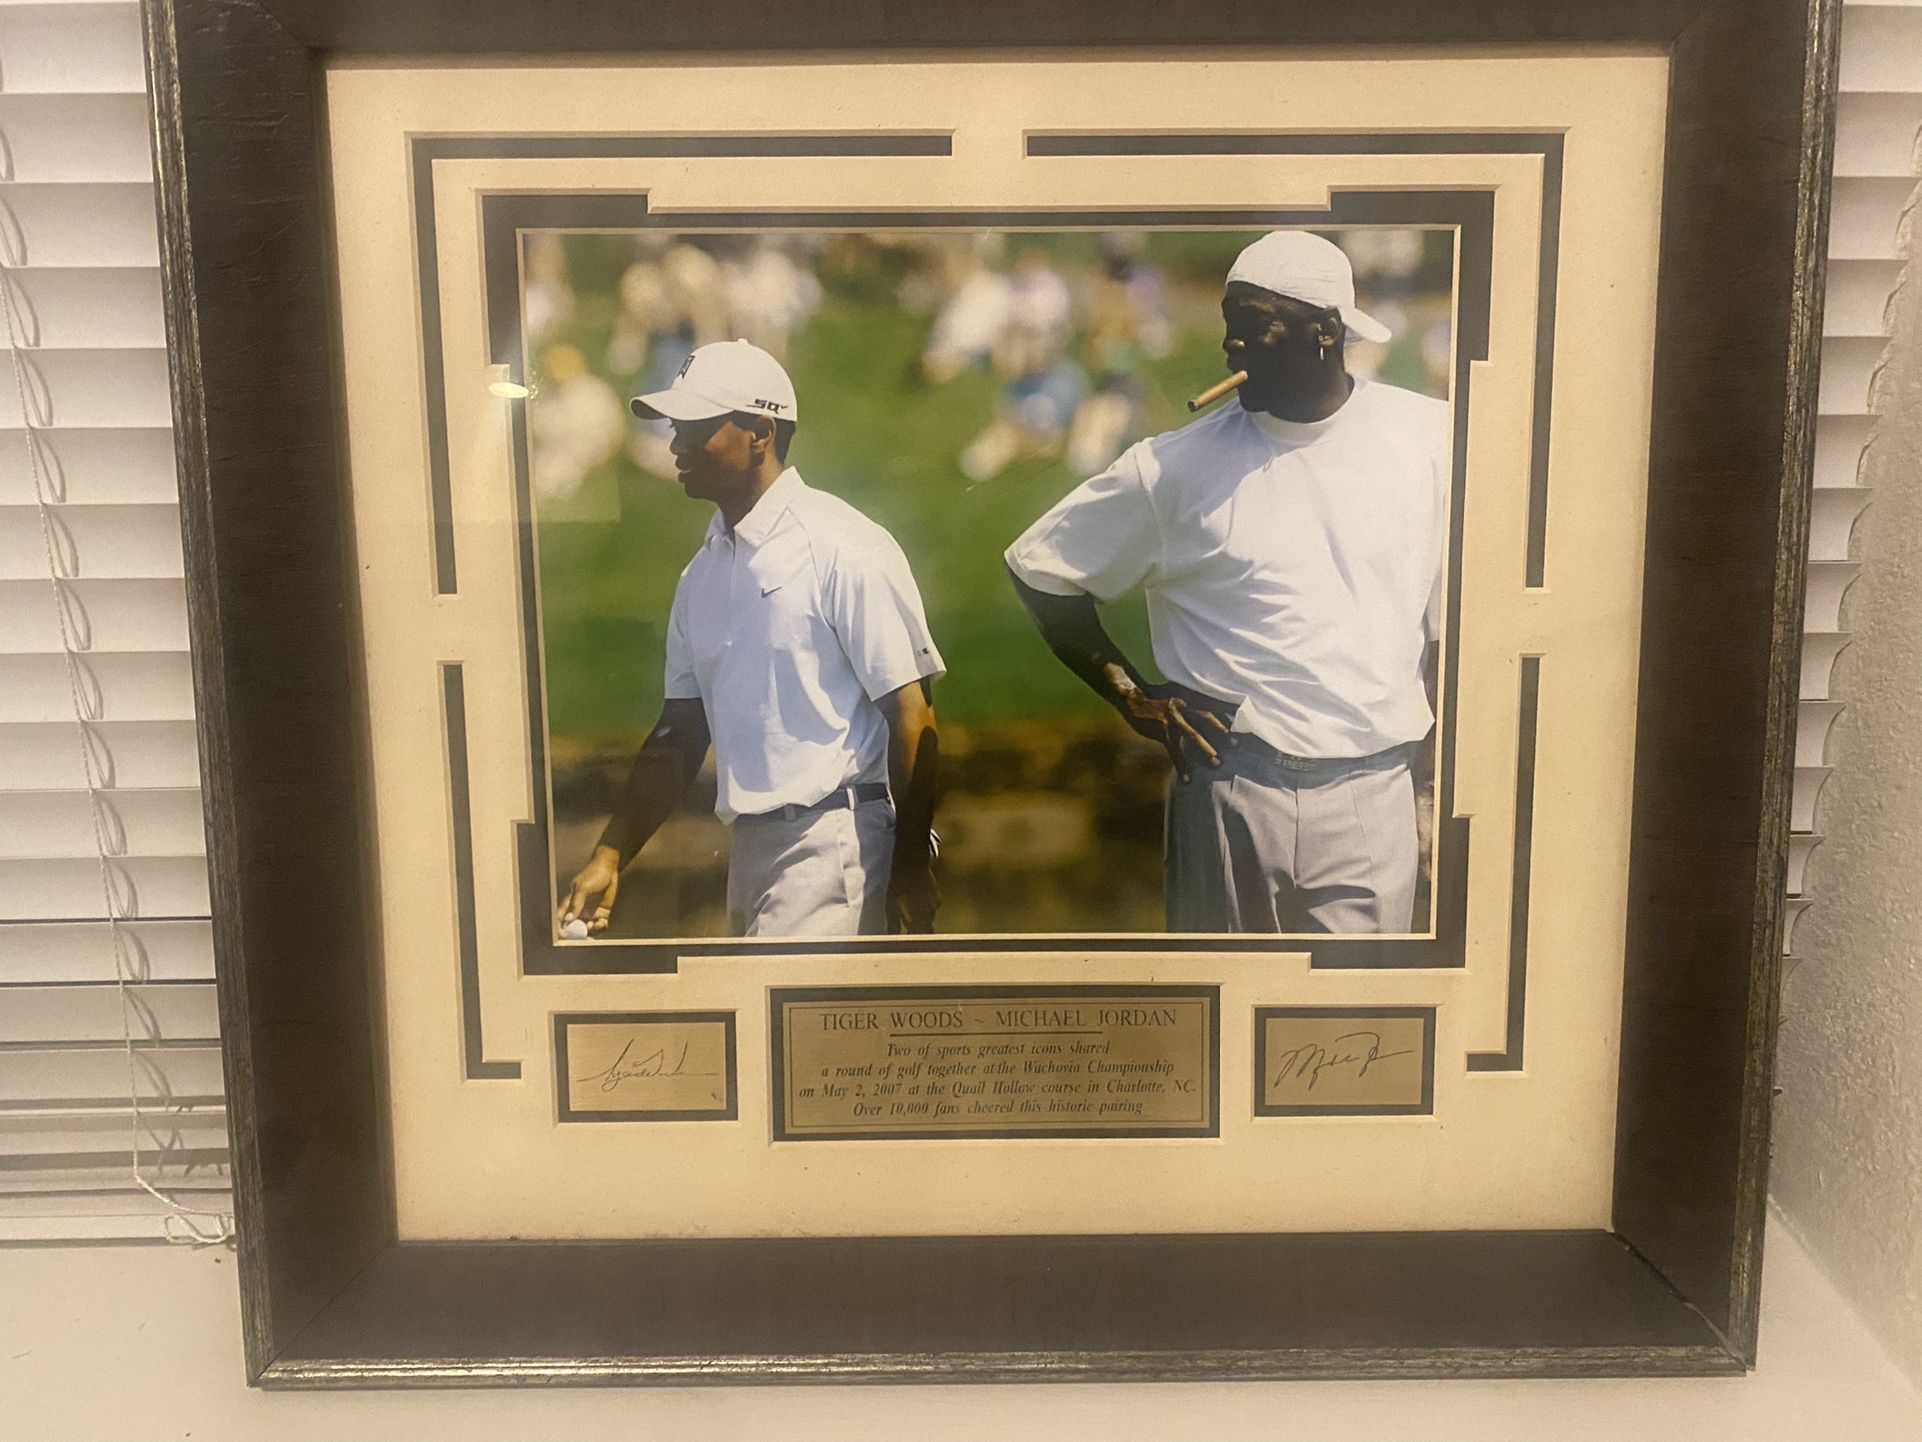 Michael jordan And Tiger Words Framed Photo With Inscribed Signatures